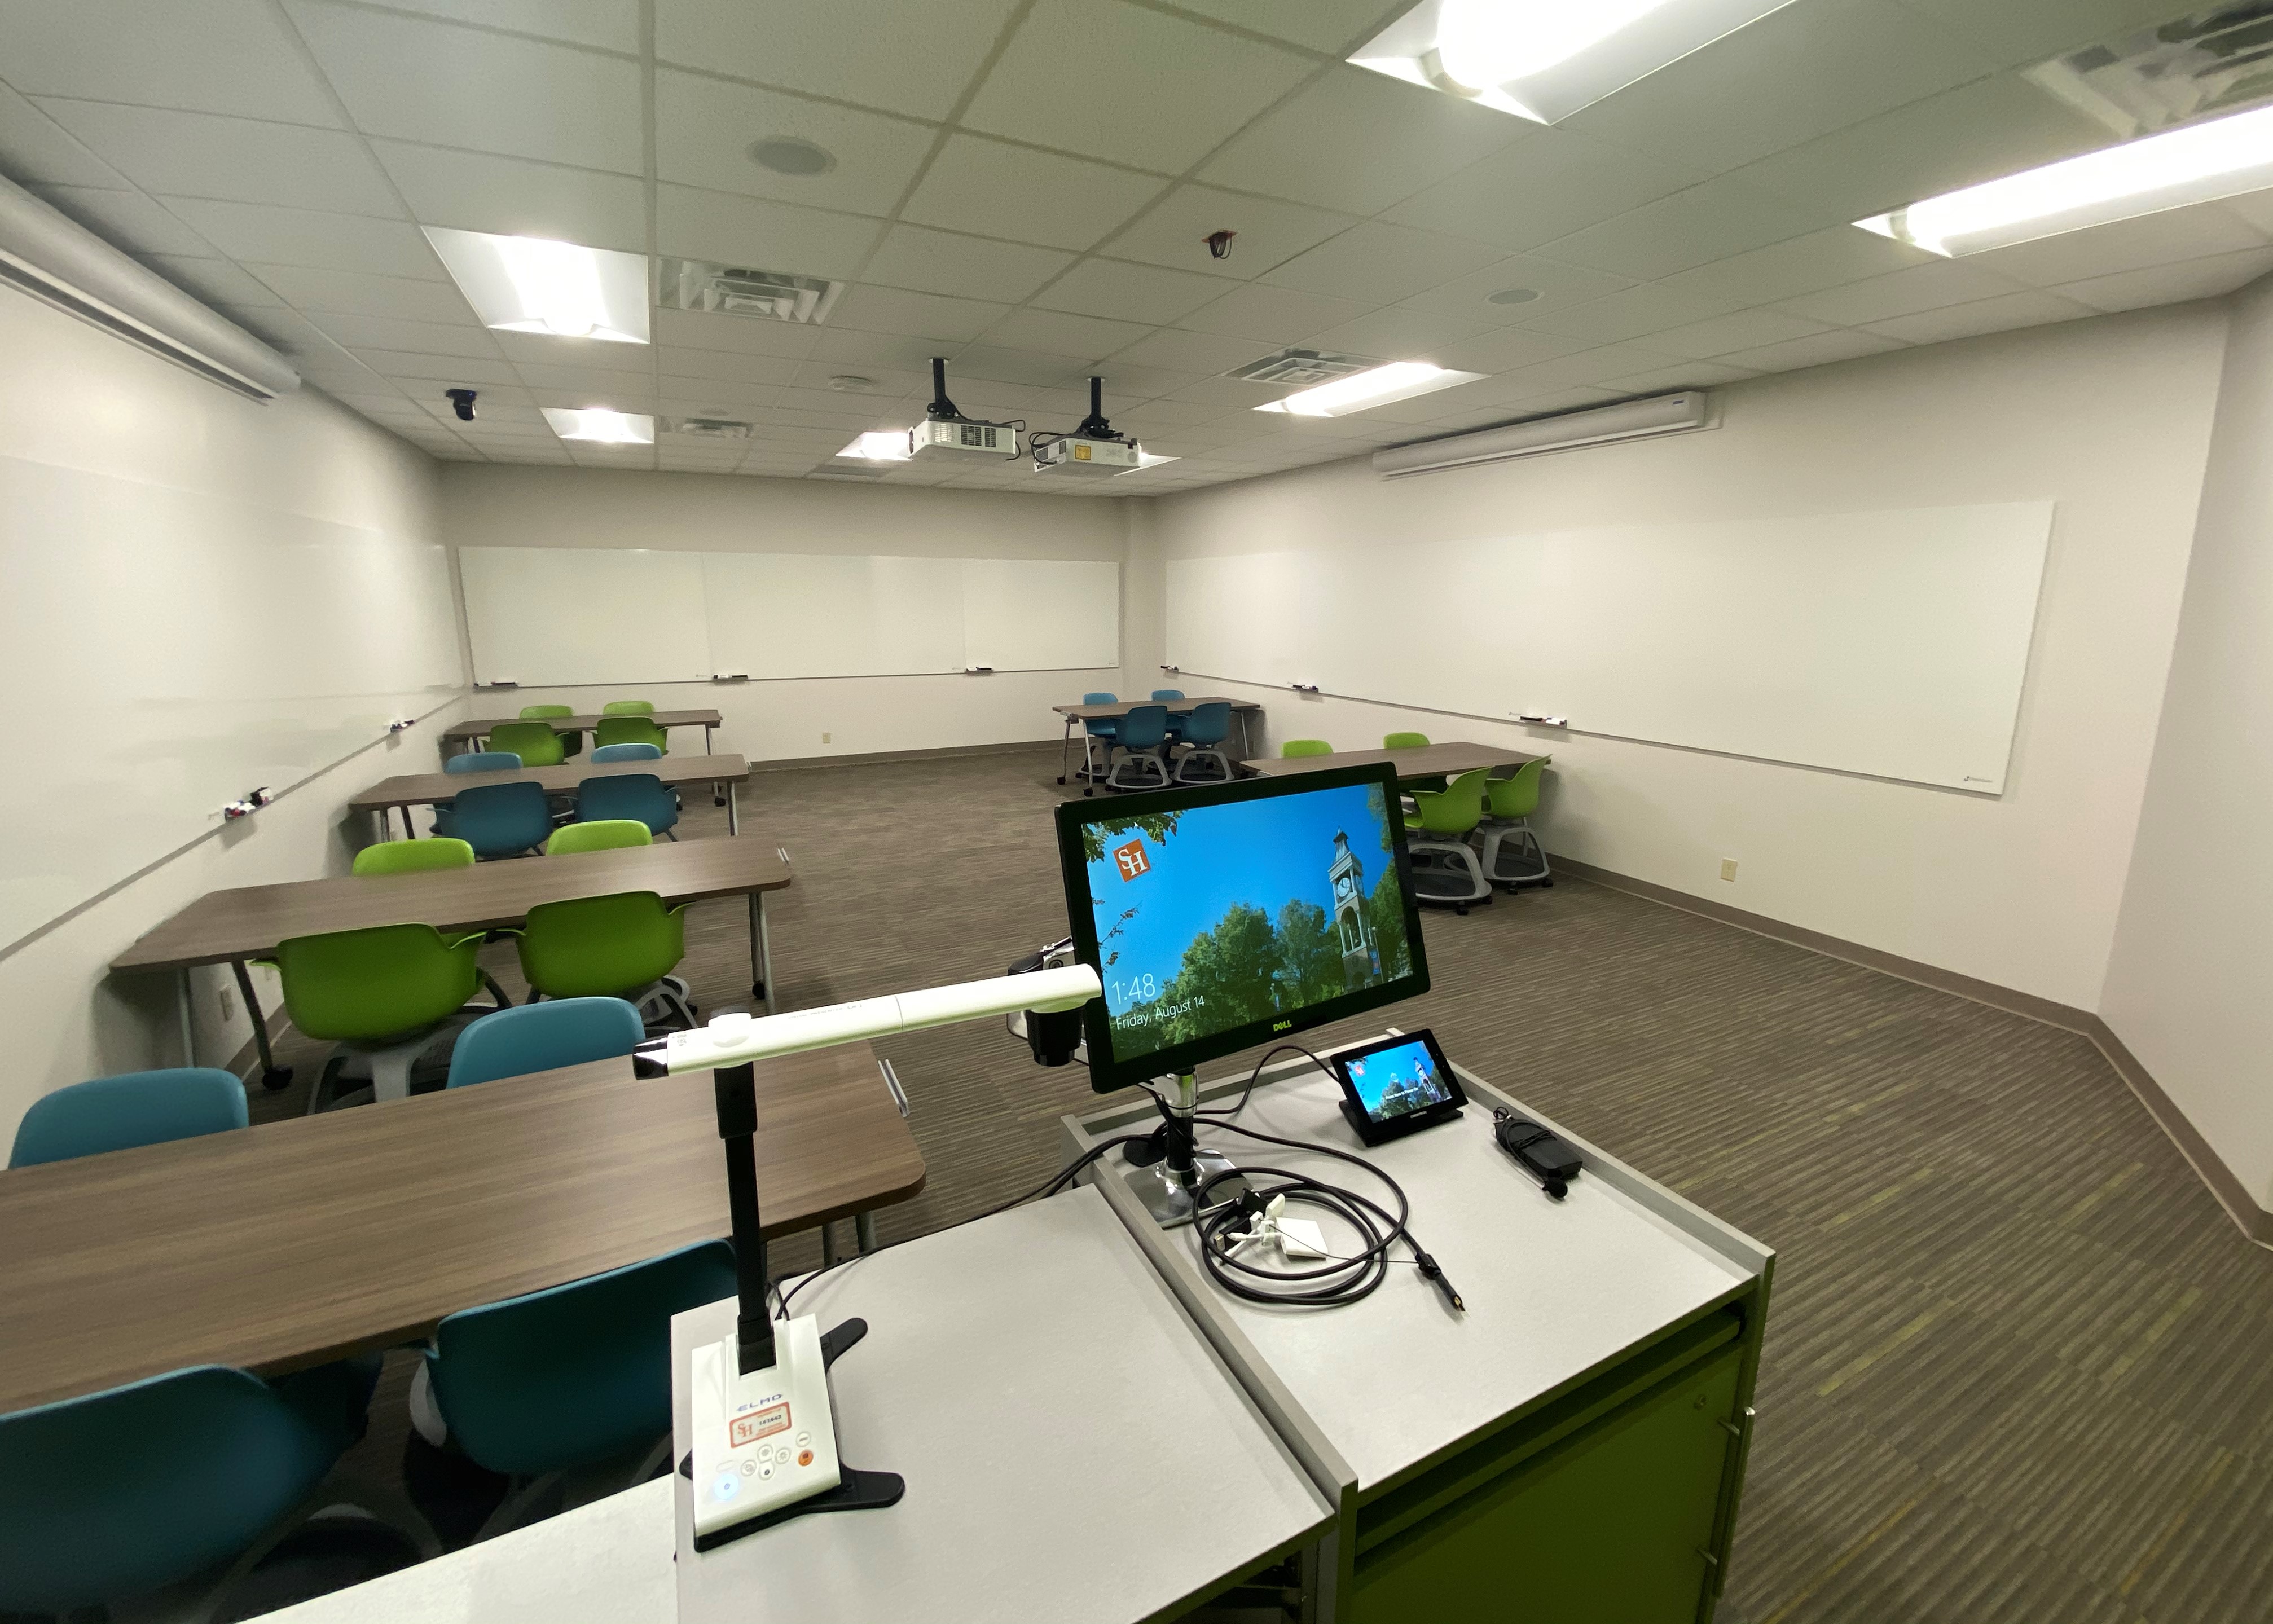 LDB 208, tables and chairs ina large classroom with a projector screen in the background. One wall is bright green and the other is white.